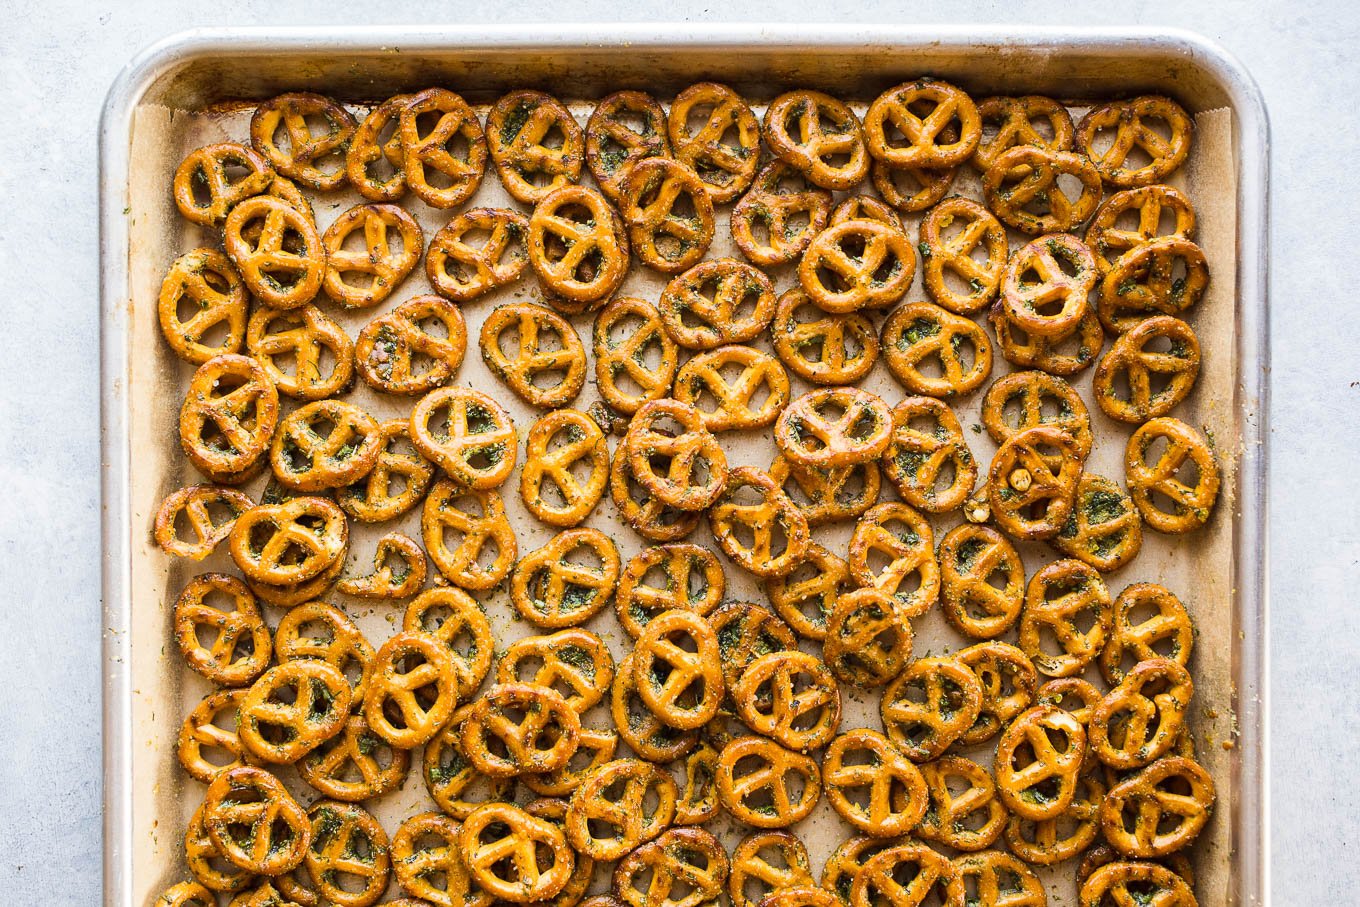 Gluten-Free Seasoned Pretzels made with olive oil, herbs, and nutritional yeast for an easy homemade snack recipe. Vegan.